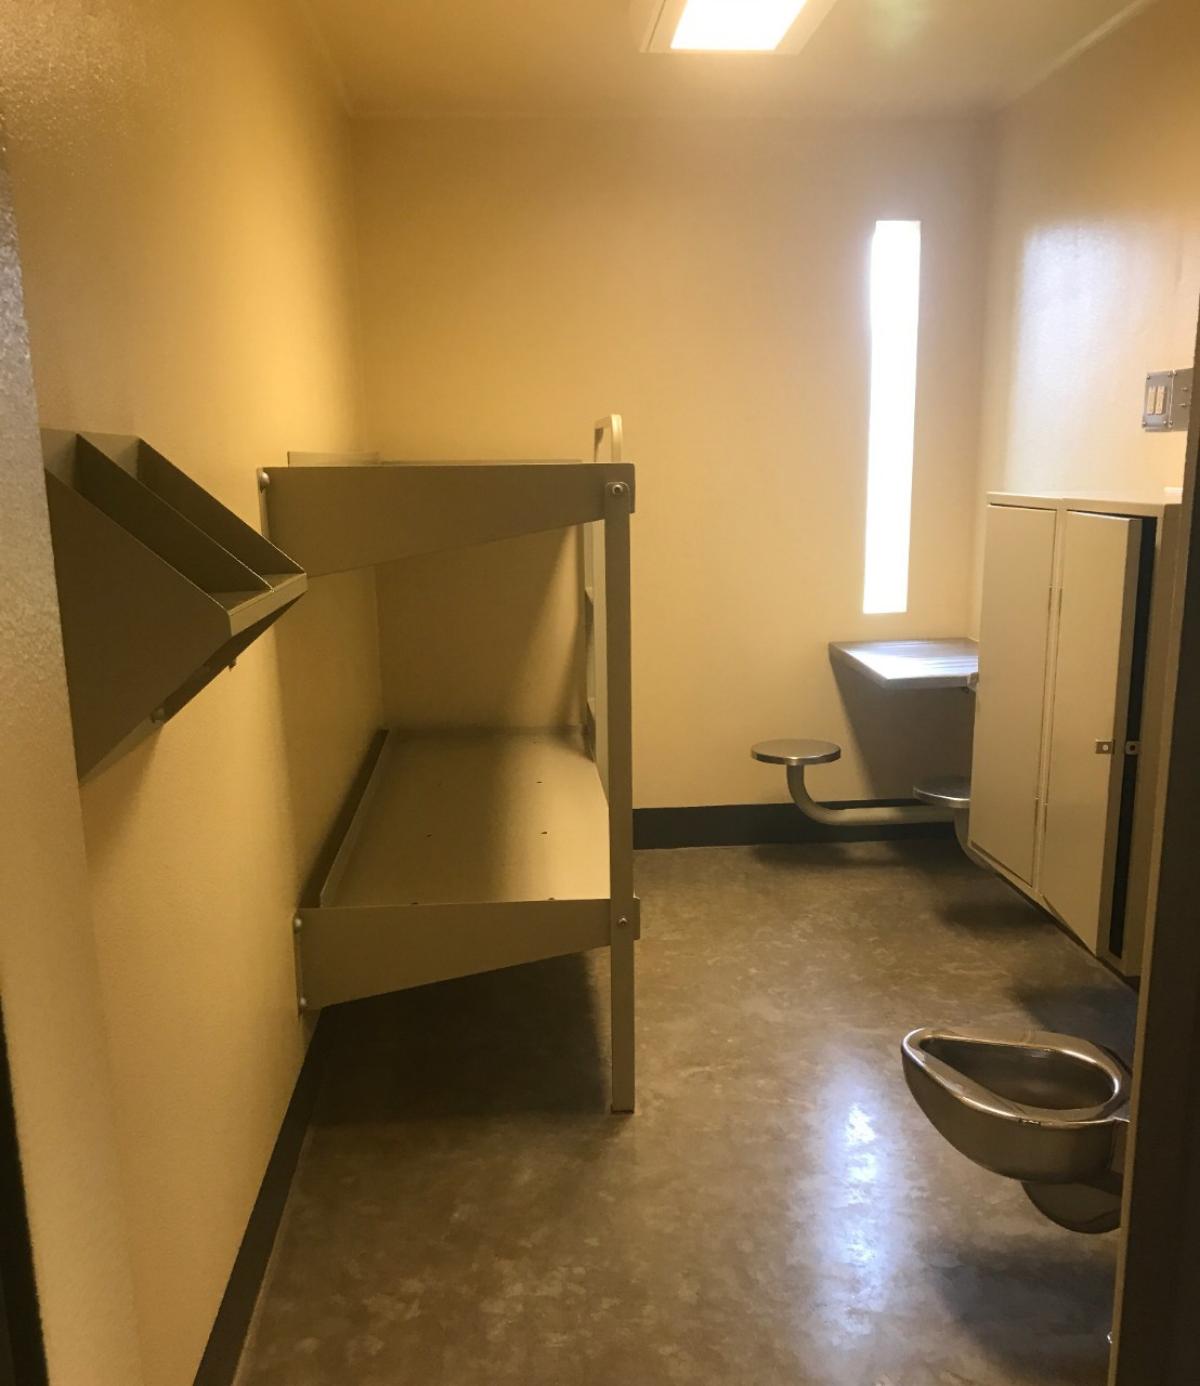 List 93+ Images what does a jail cell look like in usa Completed